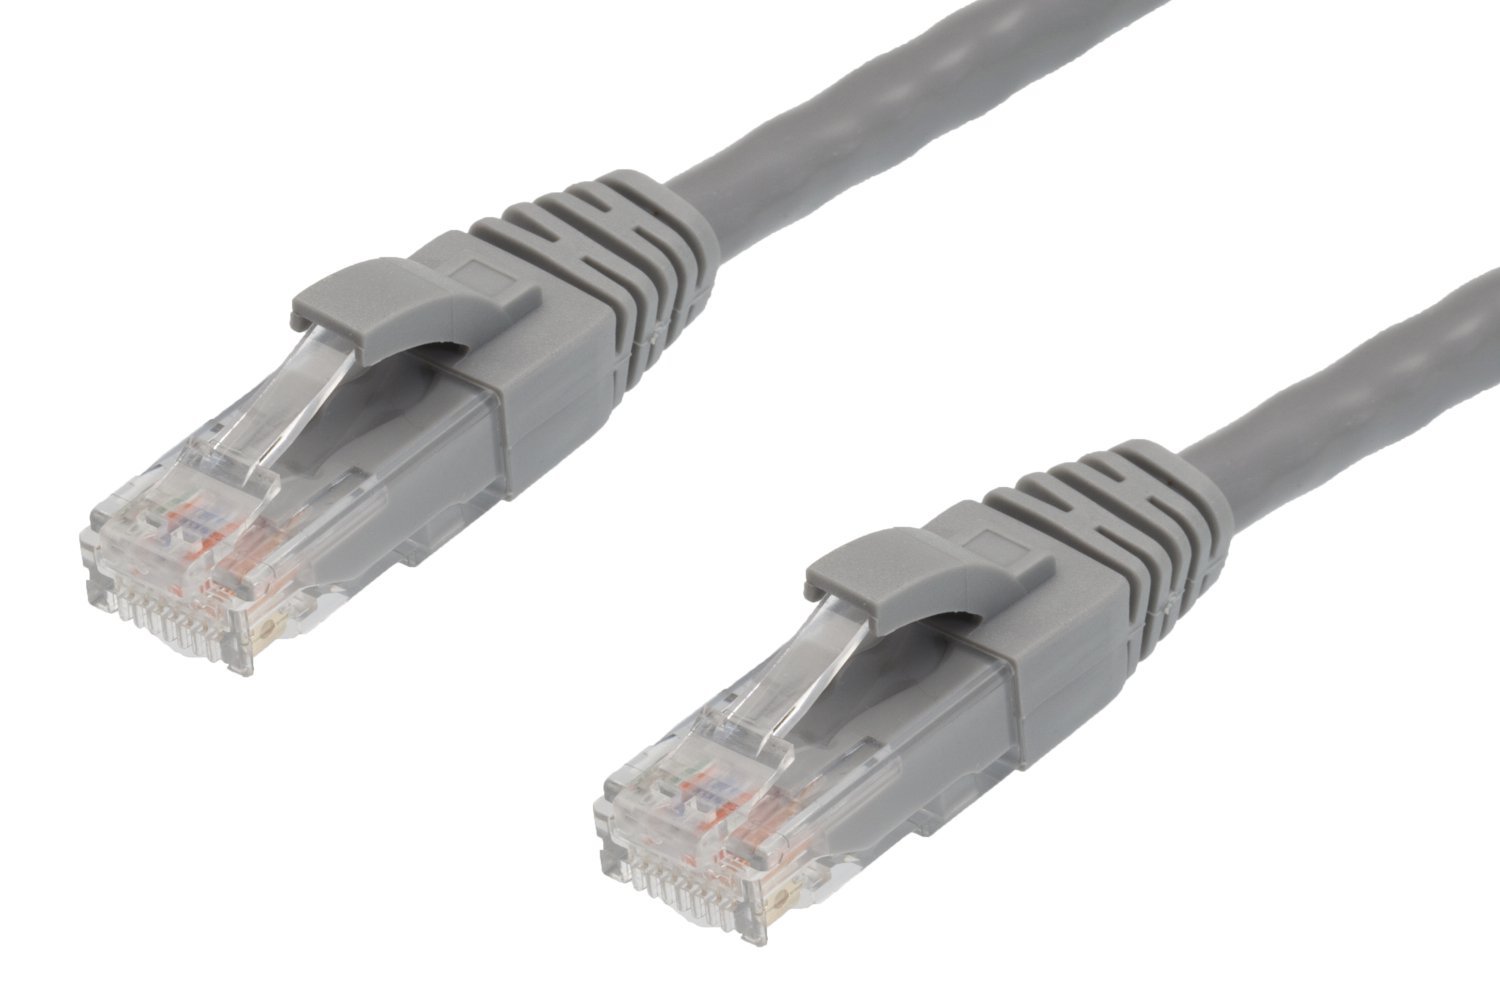 4Cabling 20M Cat 6 Ethernet Network Cable: Grey